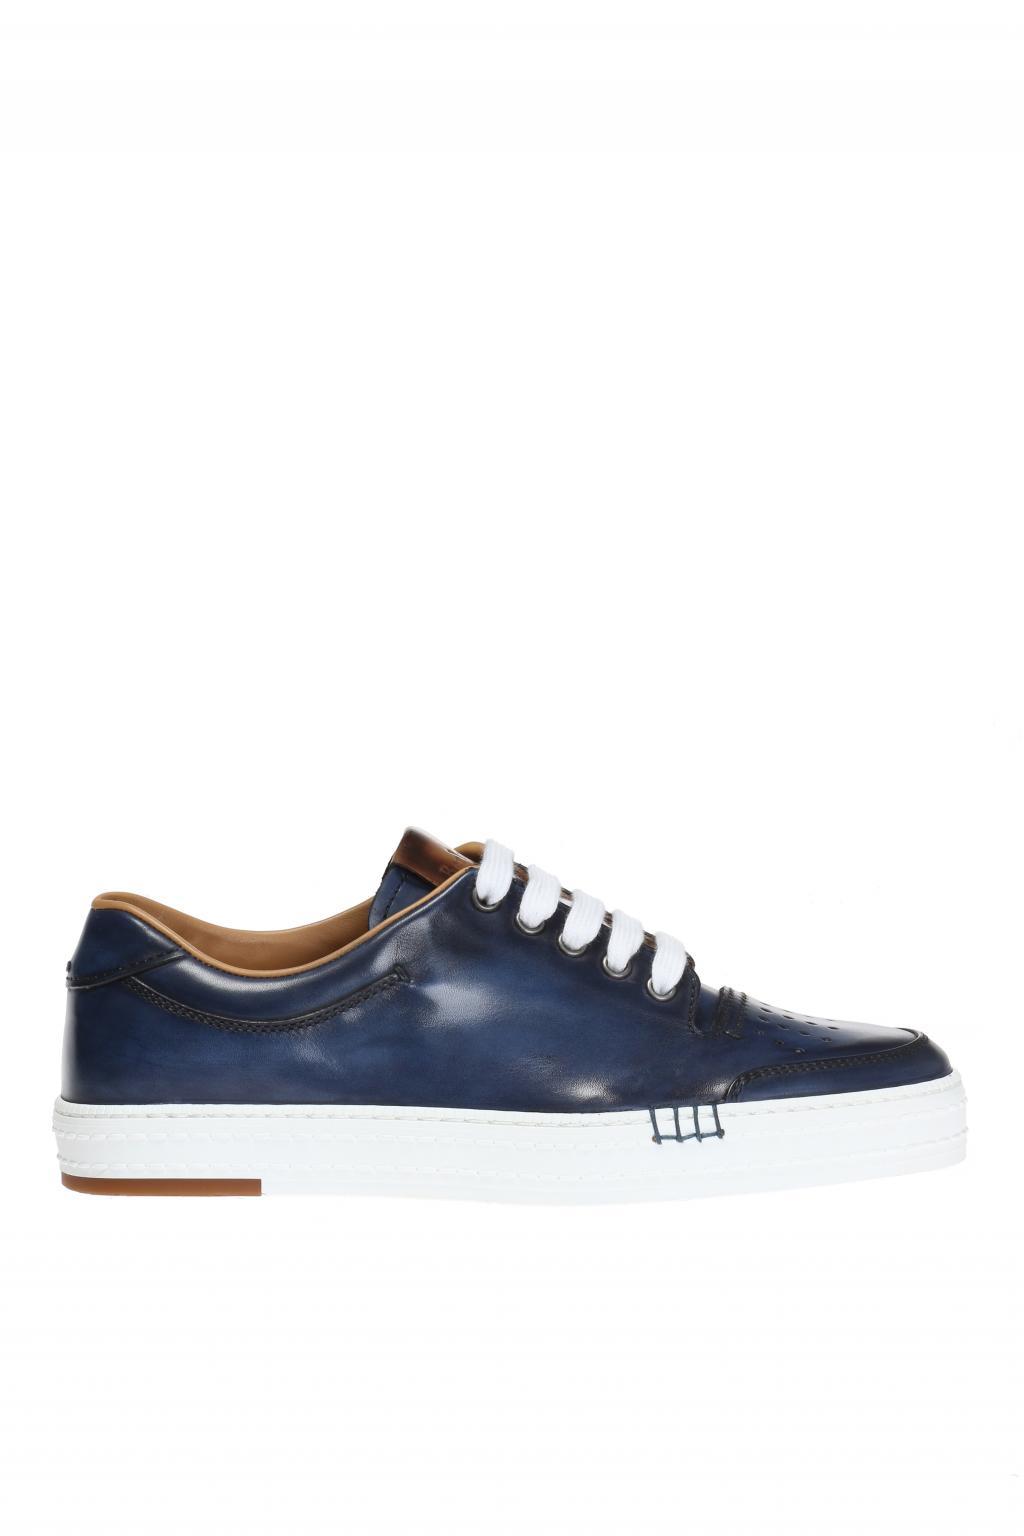 Berluti Playtime Palermo Leather Sneaker Navy Blue for Men - Lyst